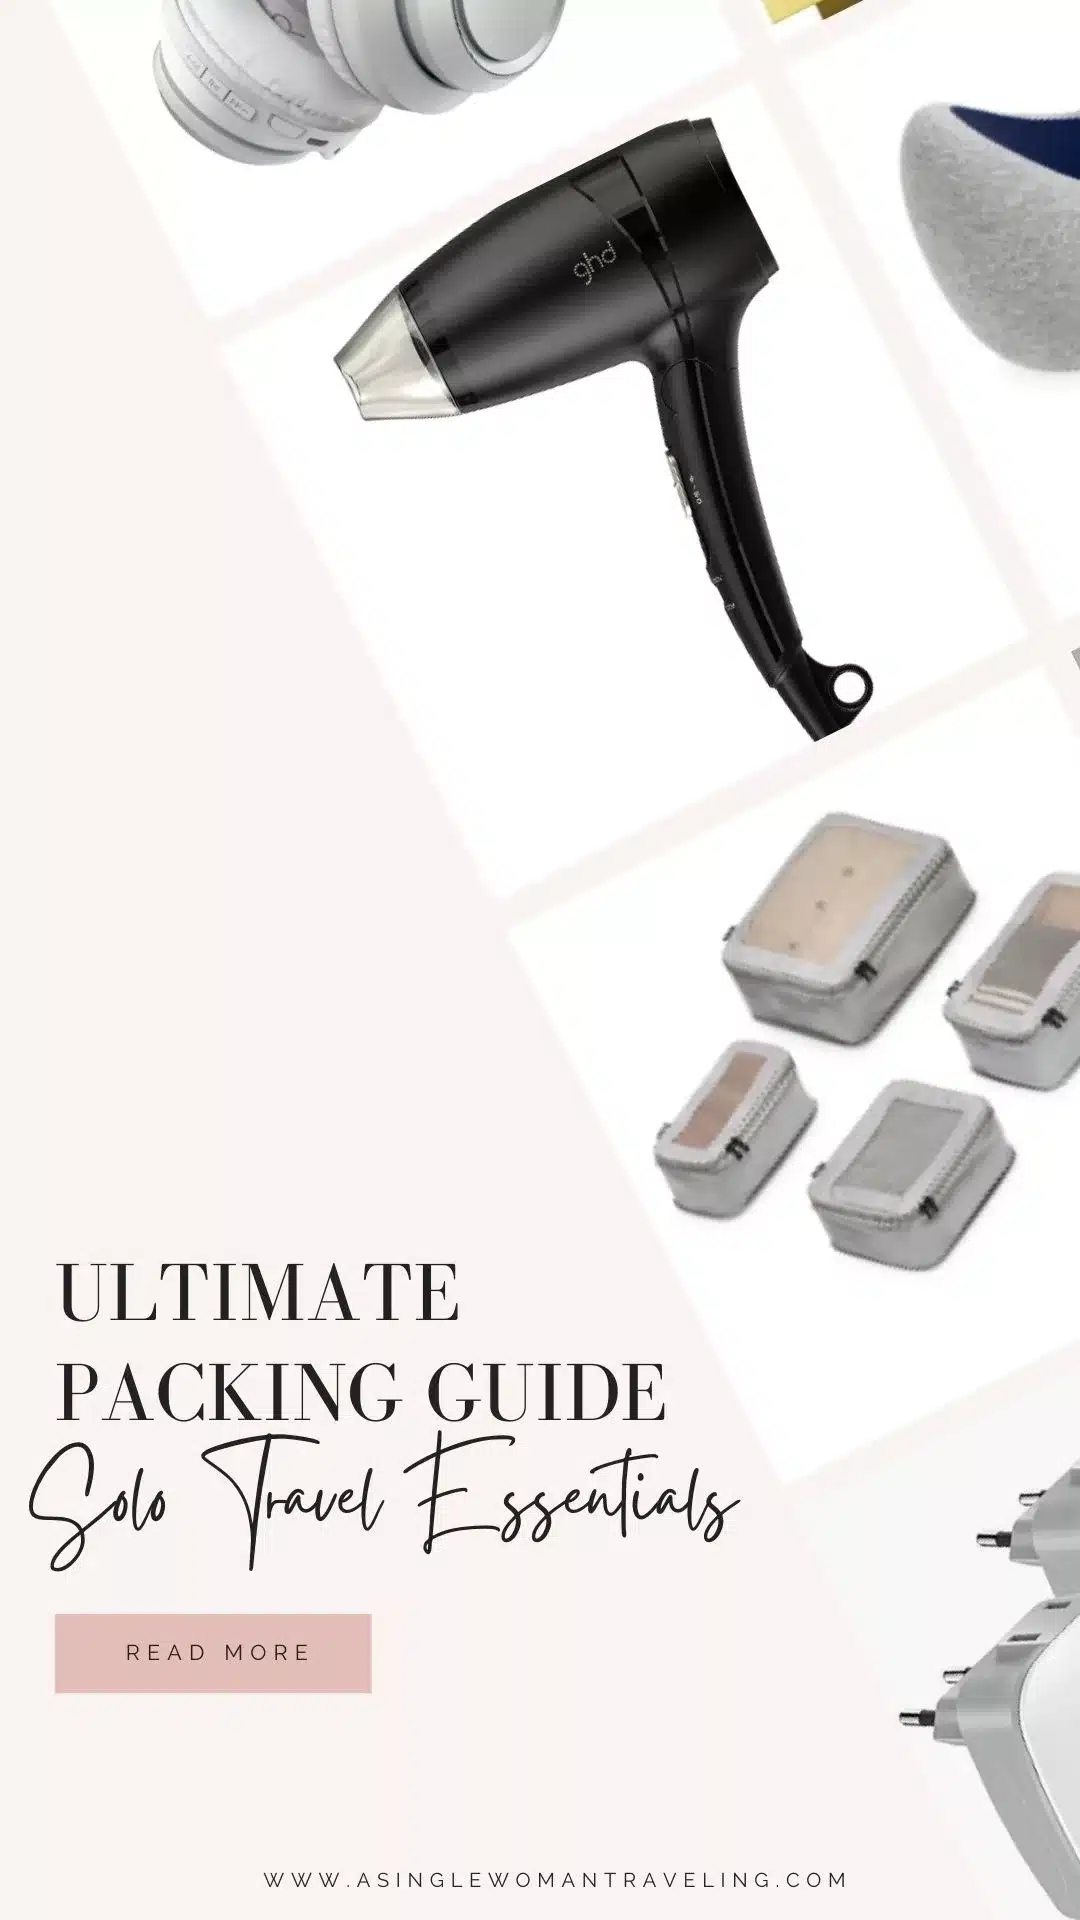 Packing guide with solo travel essentials